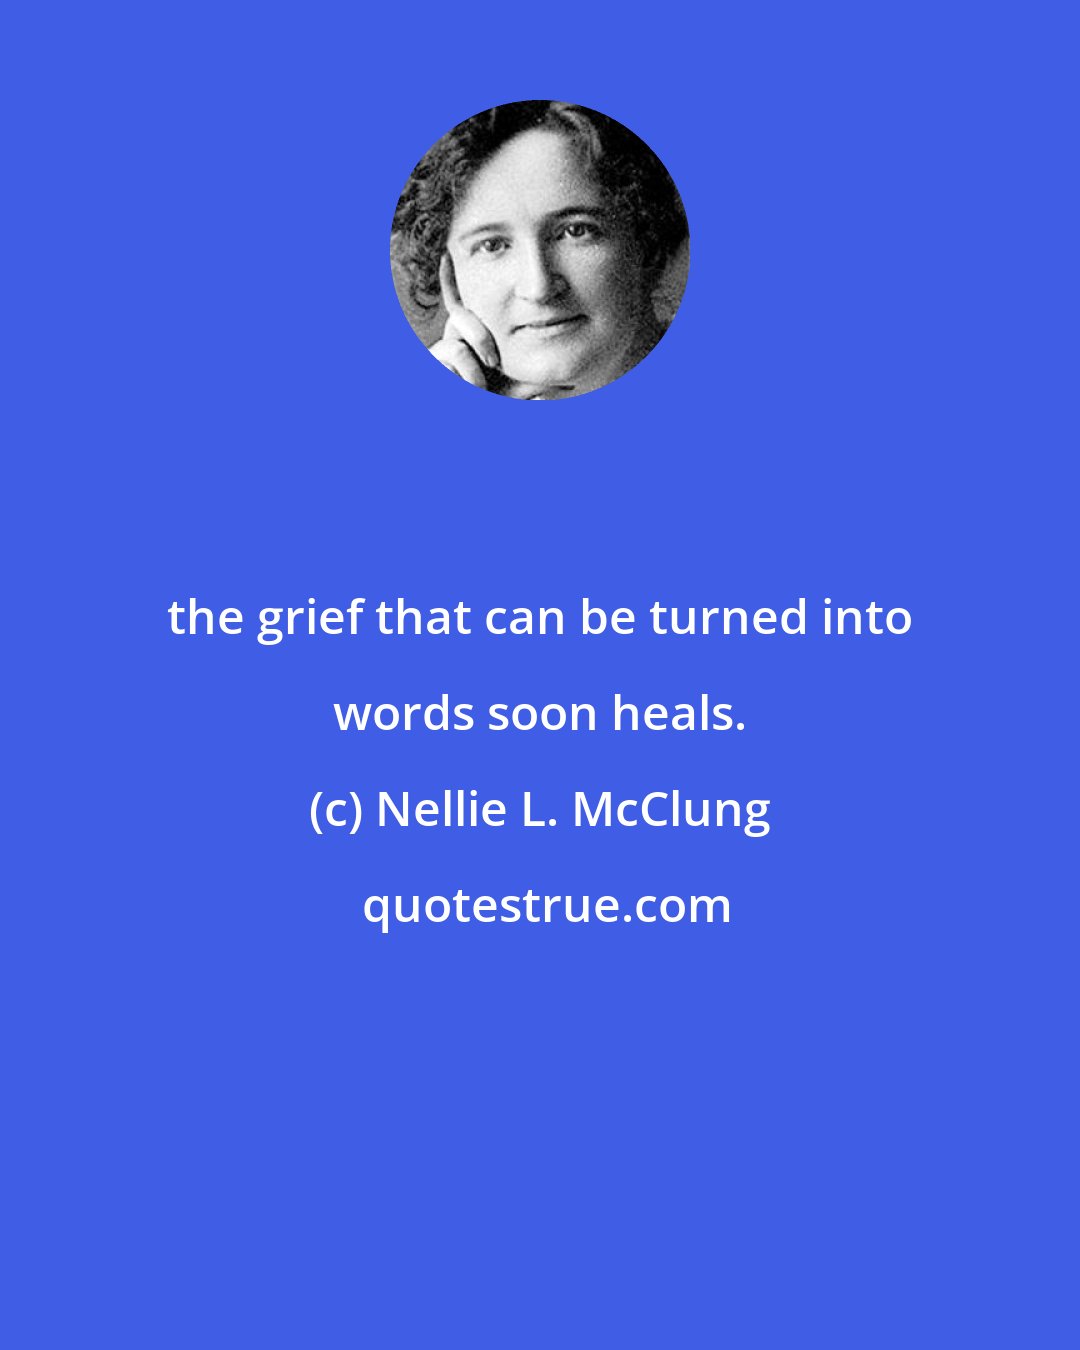 Nellie L. McClung: the grief that can be turned into words soon heals.